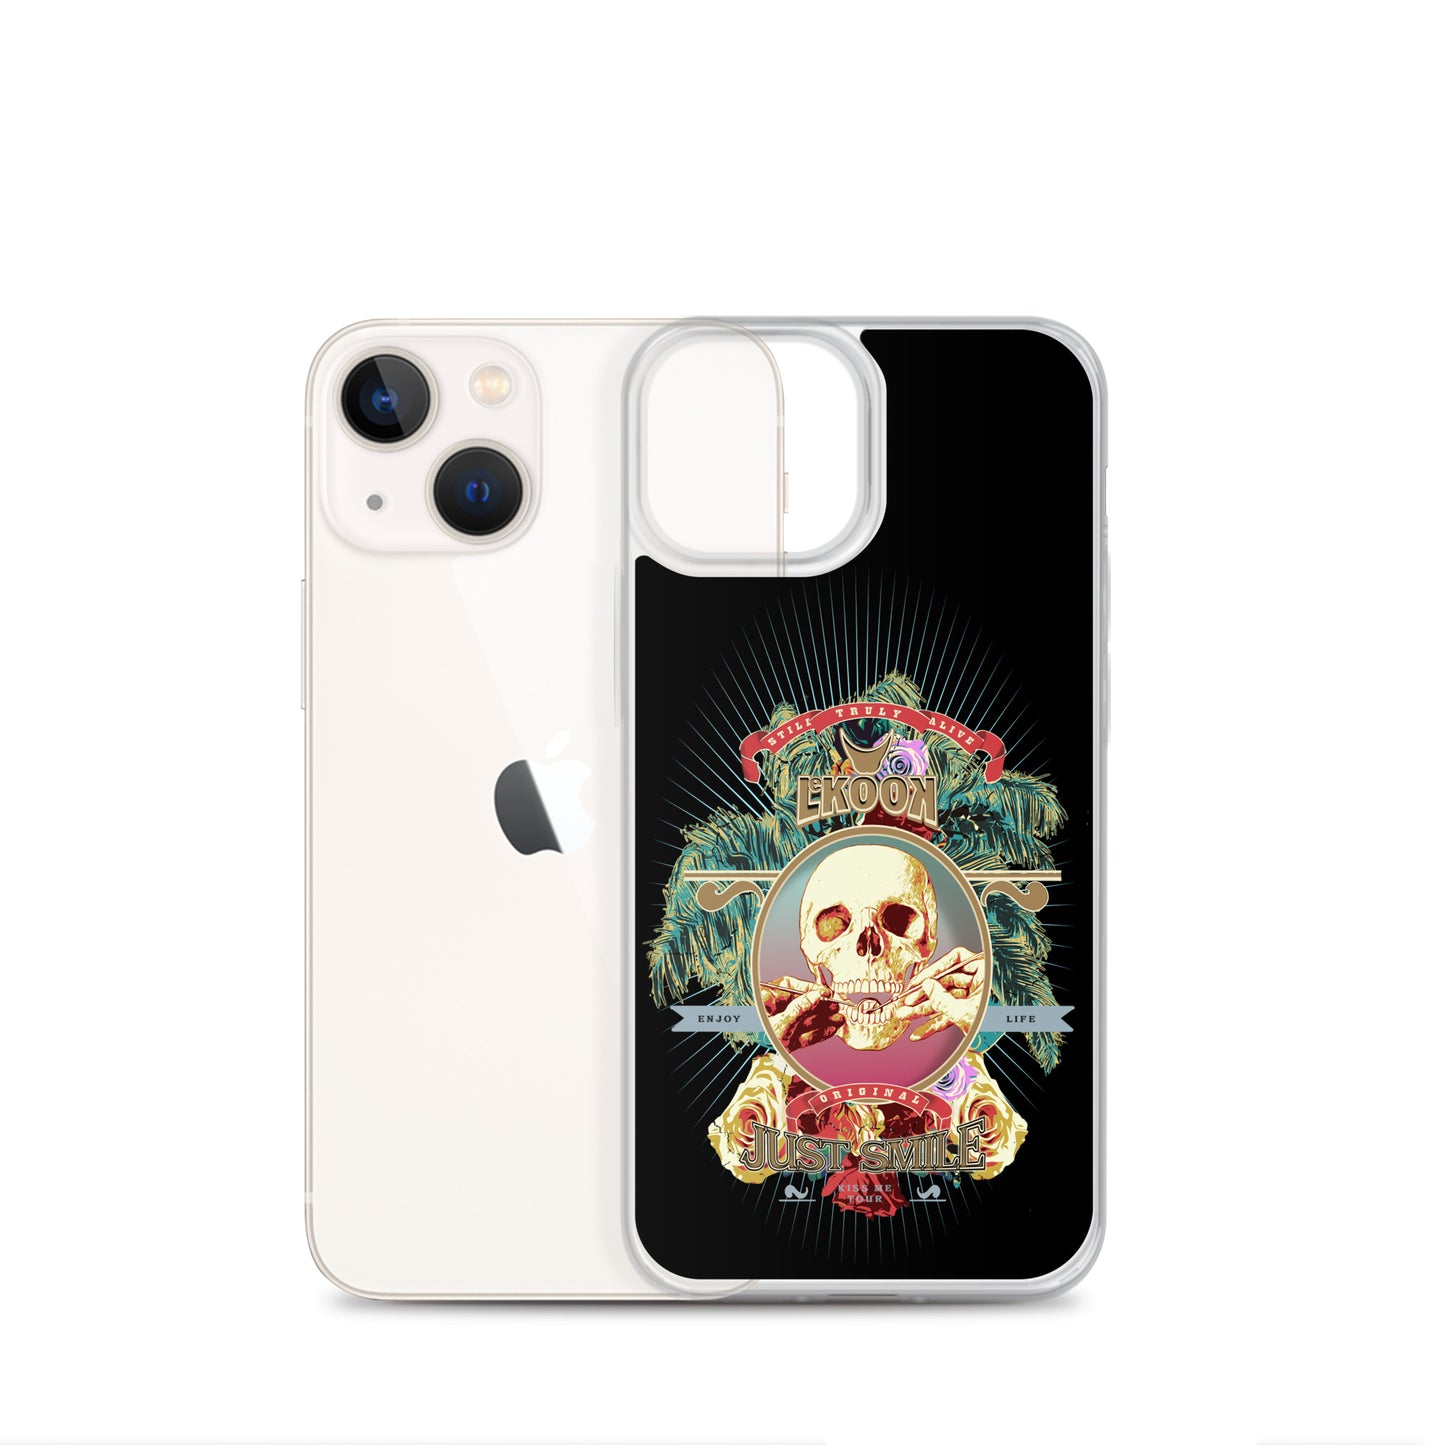 JUST SMILE IPHONE CASE